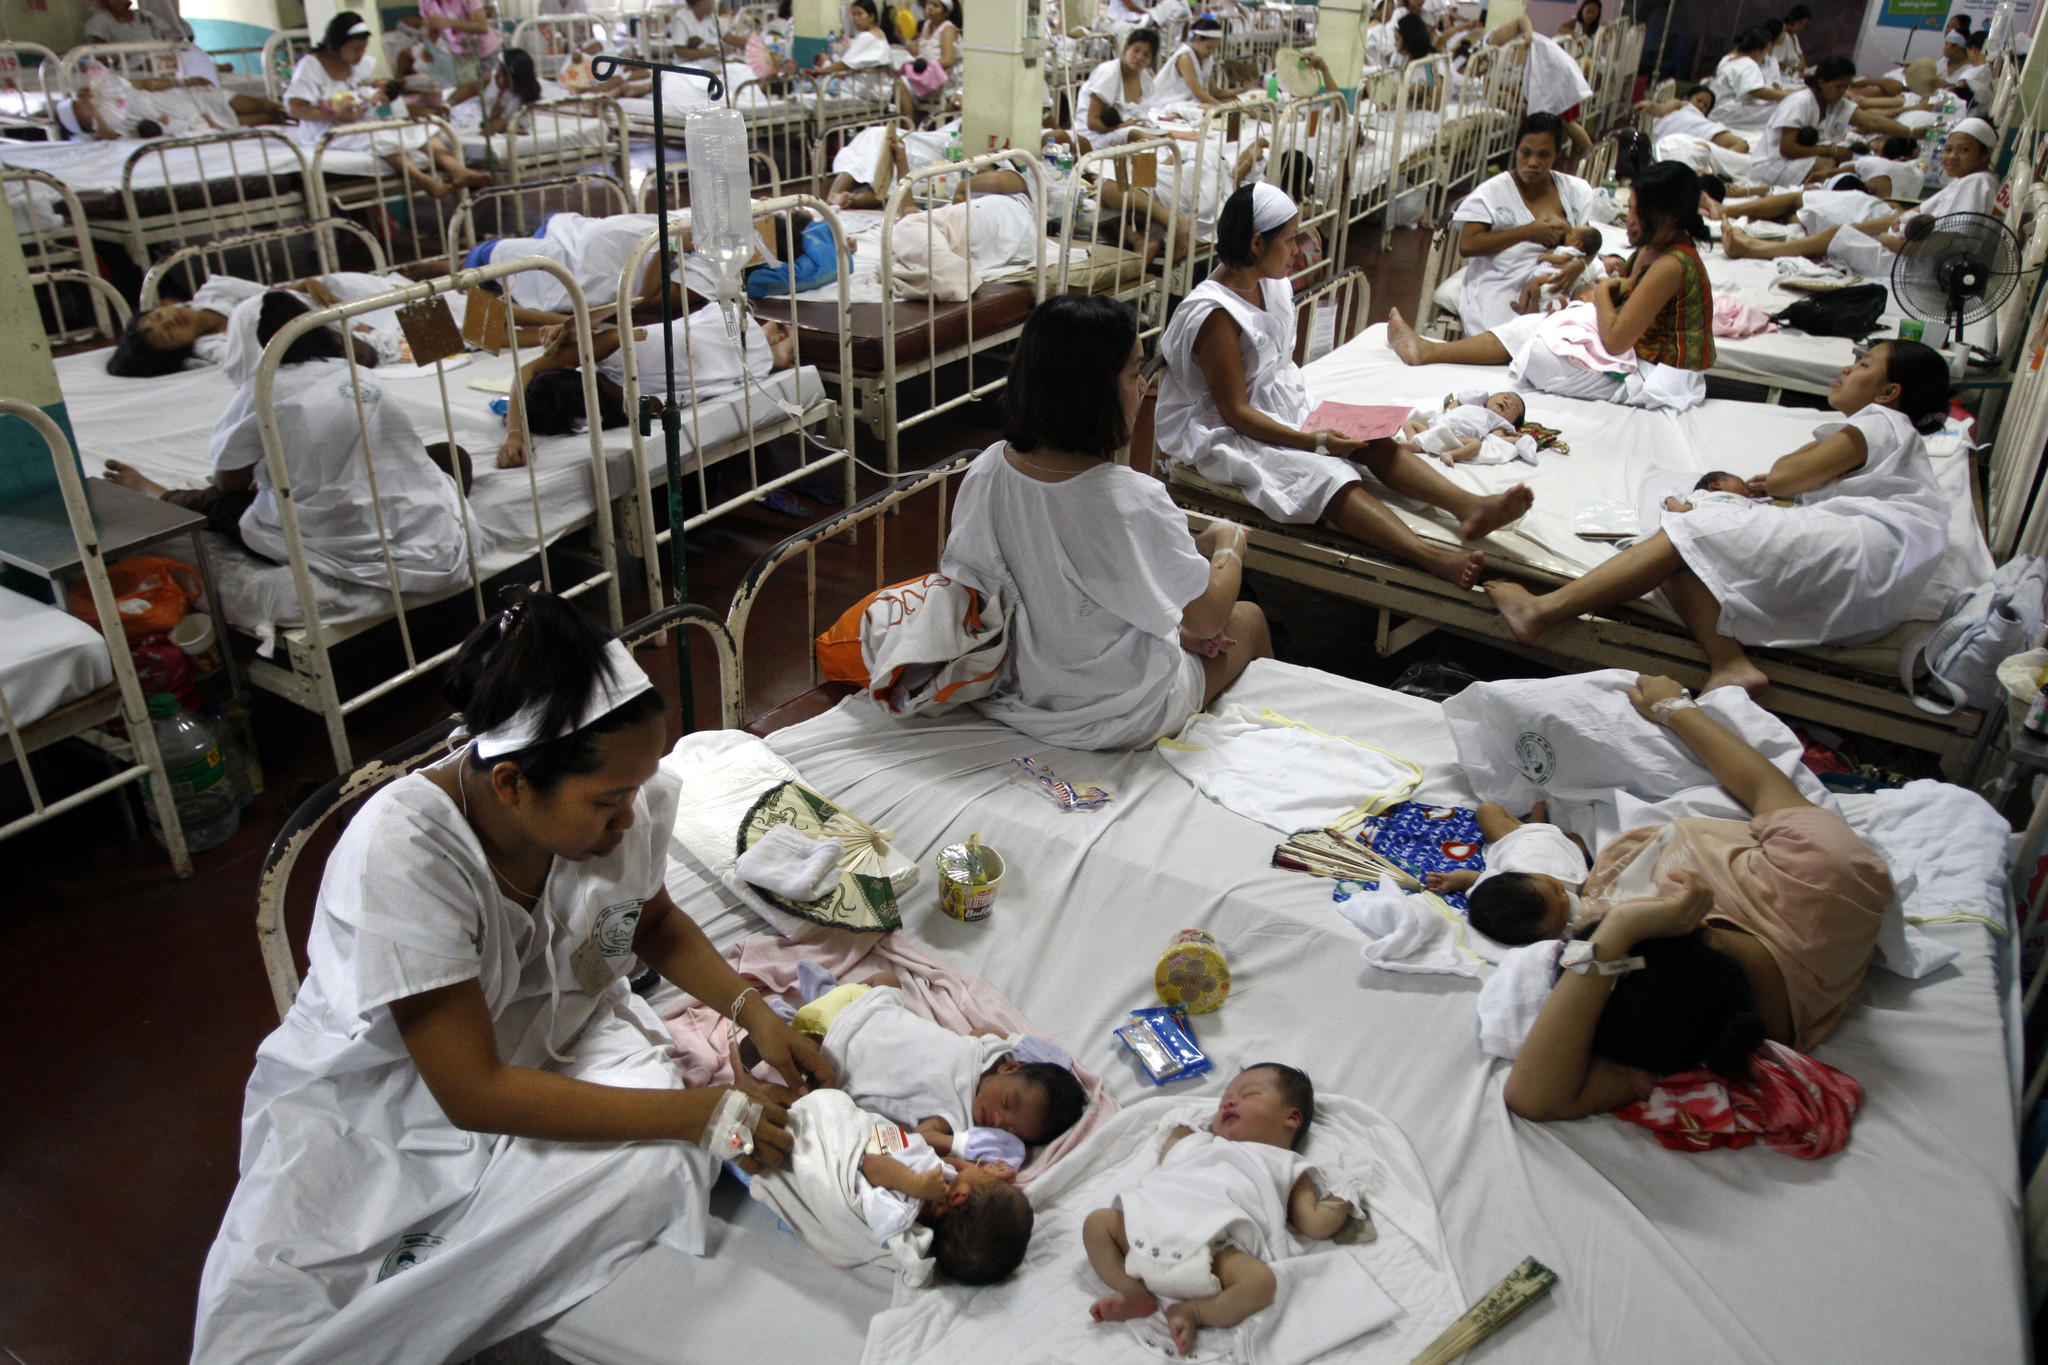 Women share beds after giving birth at Dr. Jose Fabella Memorial Hospital in Manila. The Philippine capital is one of the most densely populated places on Earth. A ban on contraception at public clinics there has put birth control out of the reach of most of the city's poor. (Rick Loomis / Los Angeles Times)